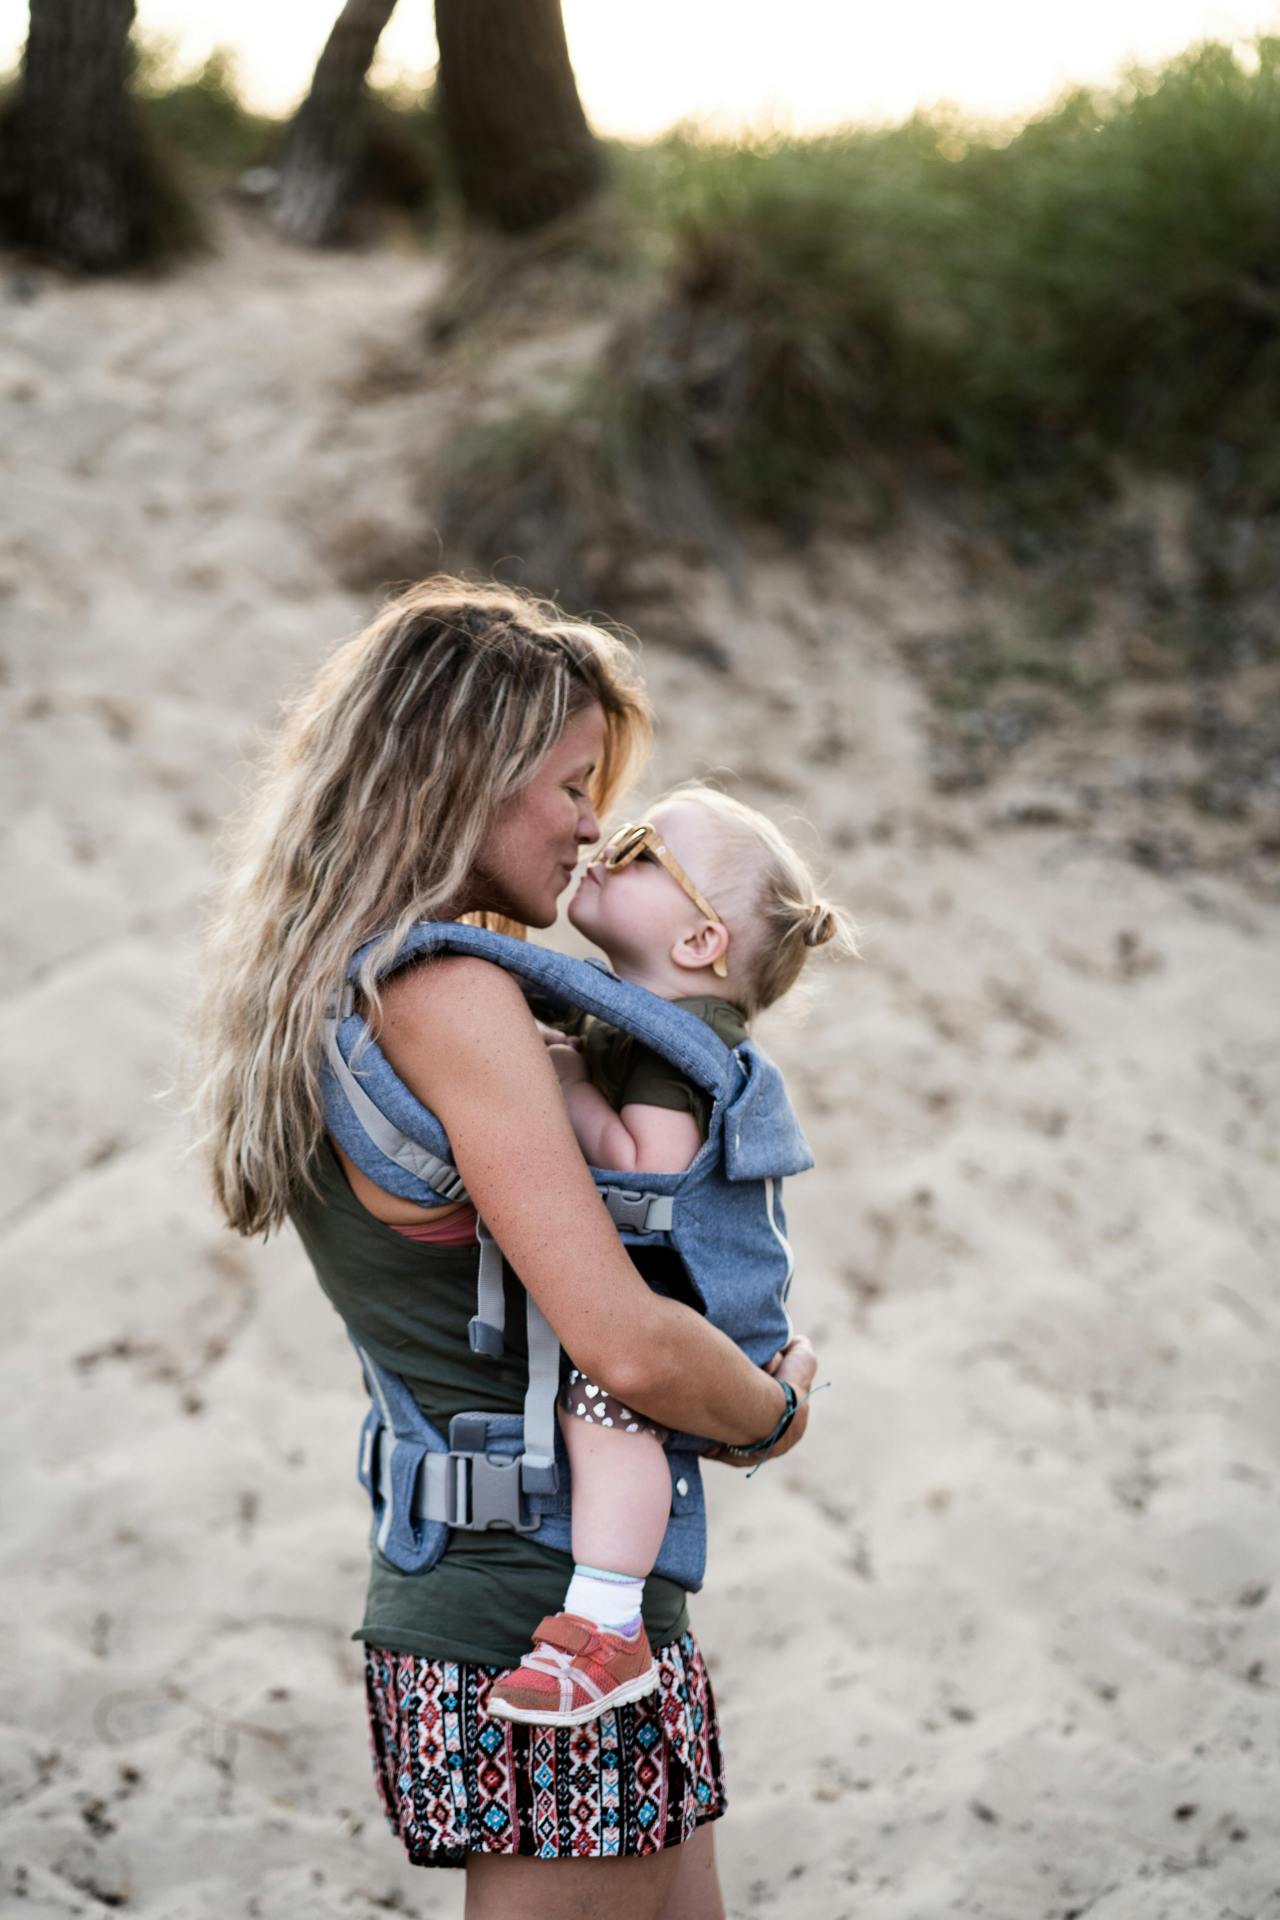 A mother holds her daughter in a sling and they face each other, smiling.